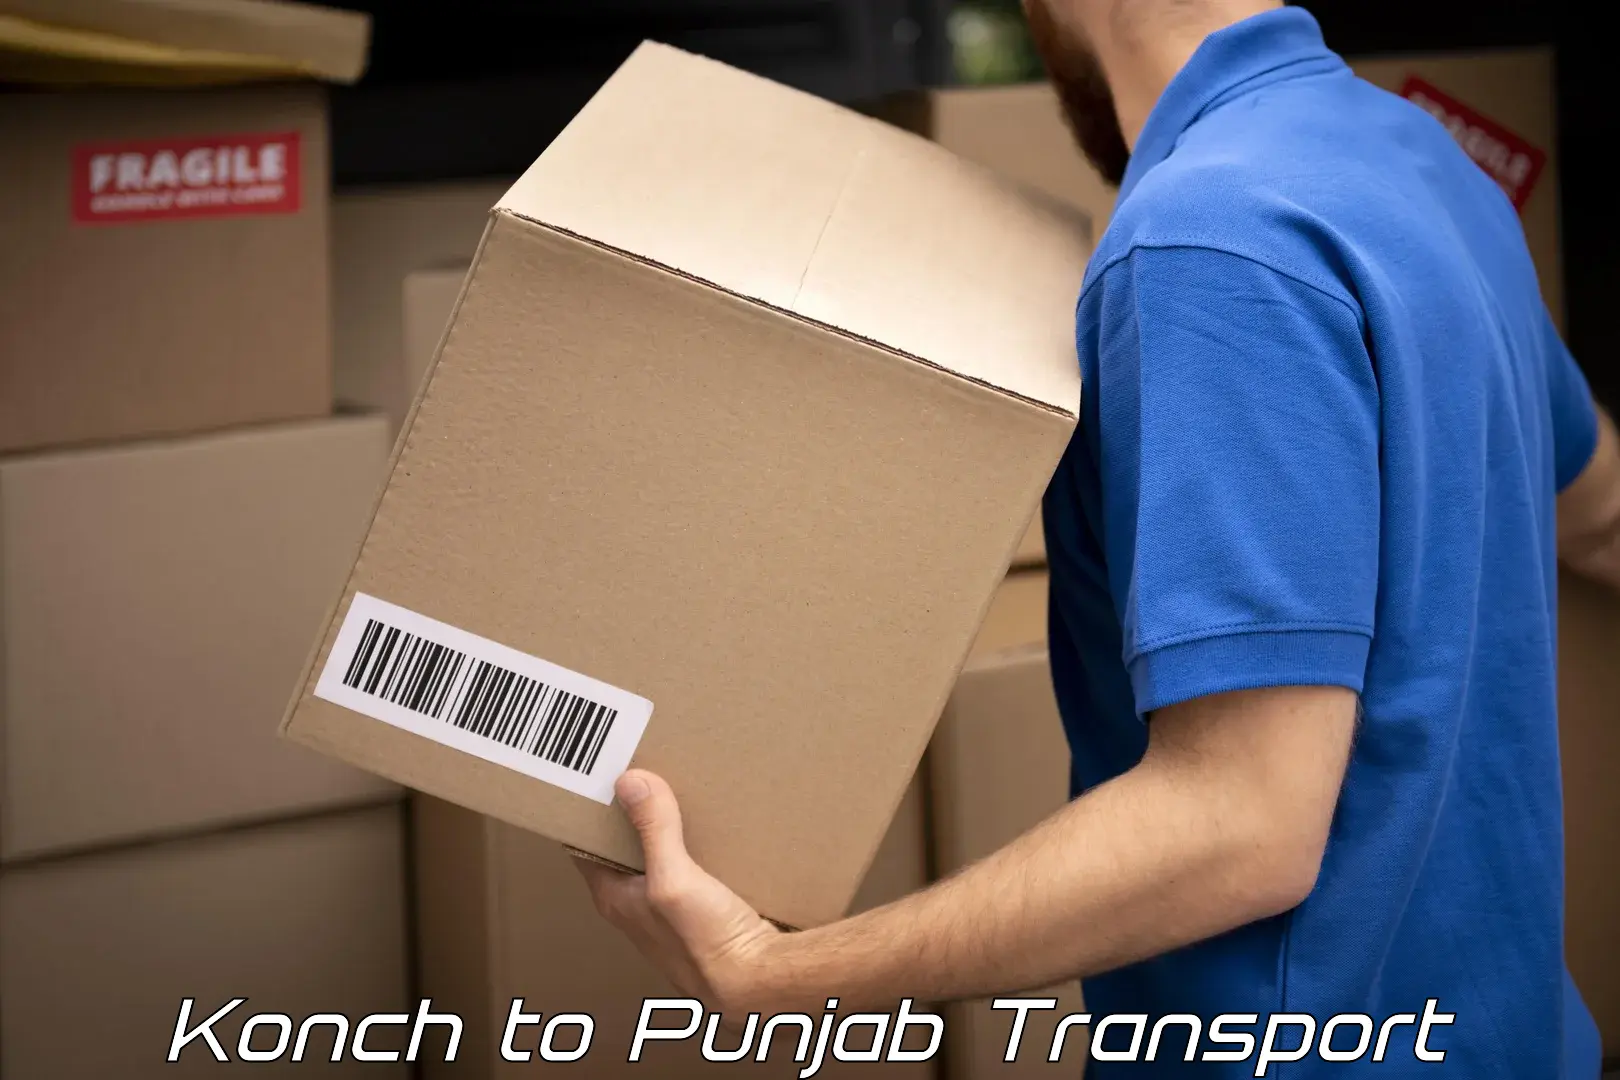 Two wheeler transport services Konch to Amritsar